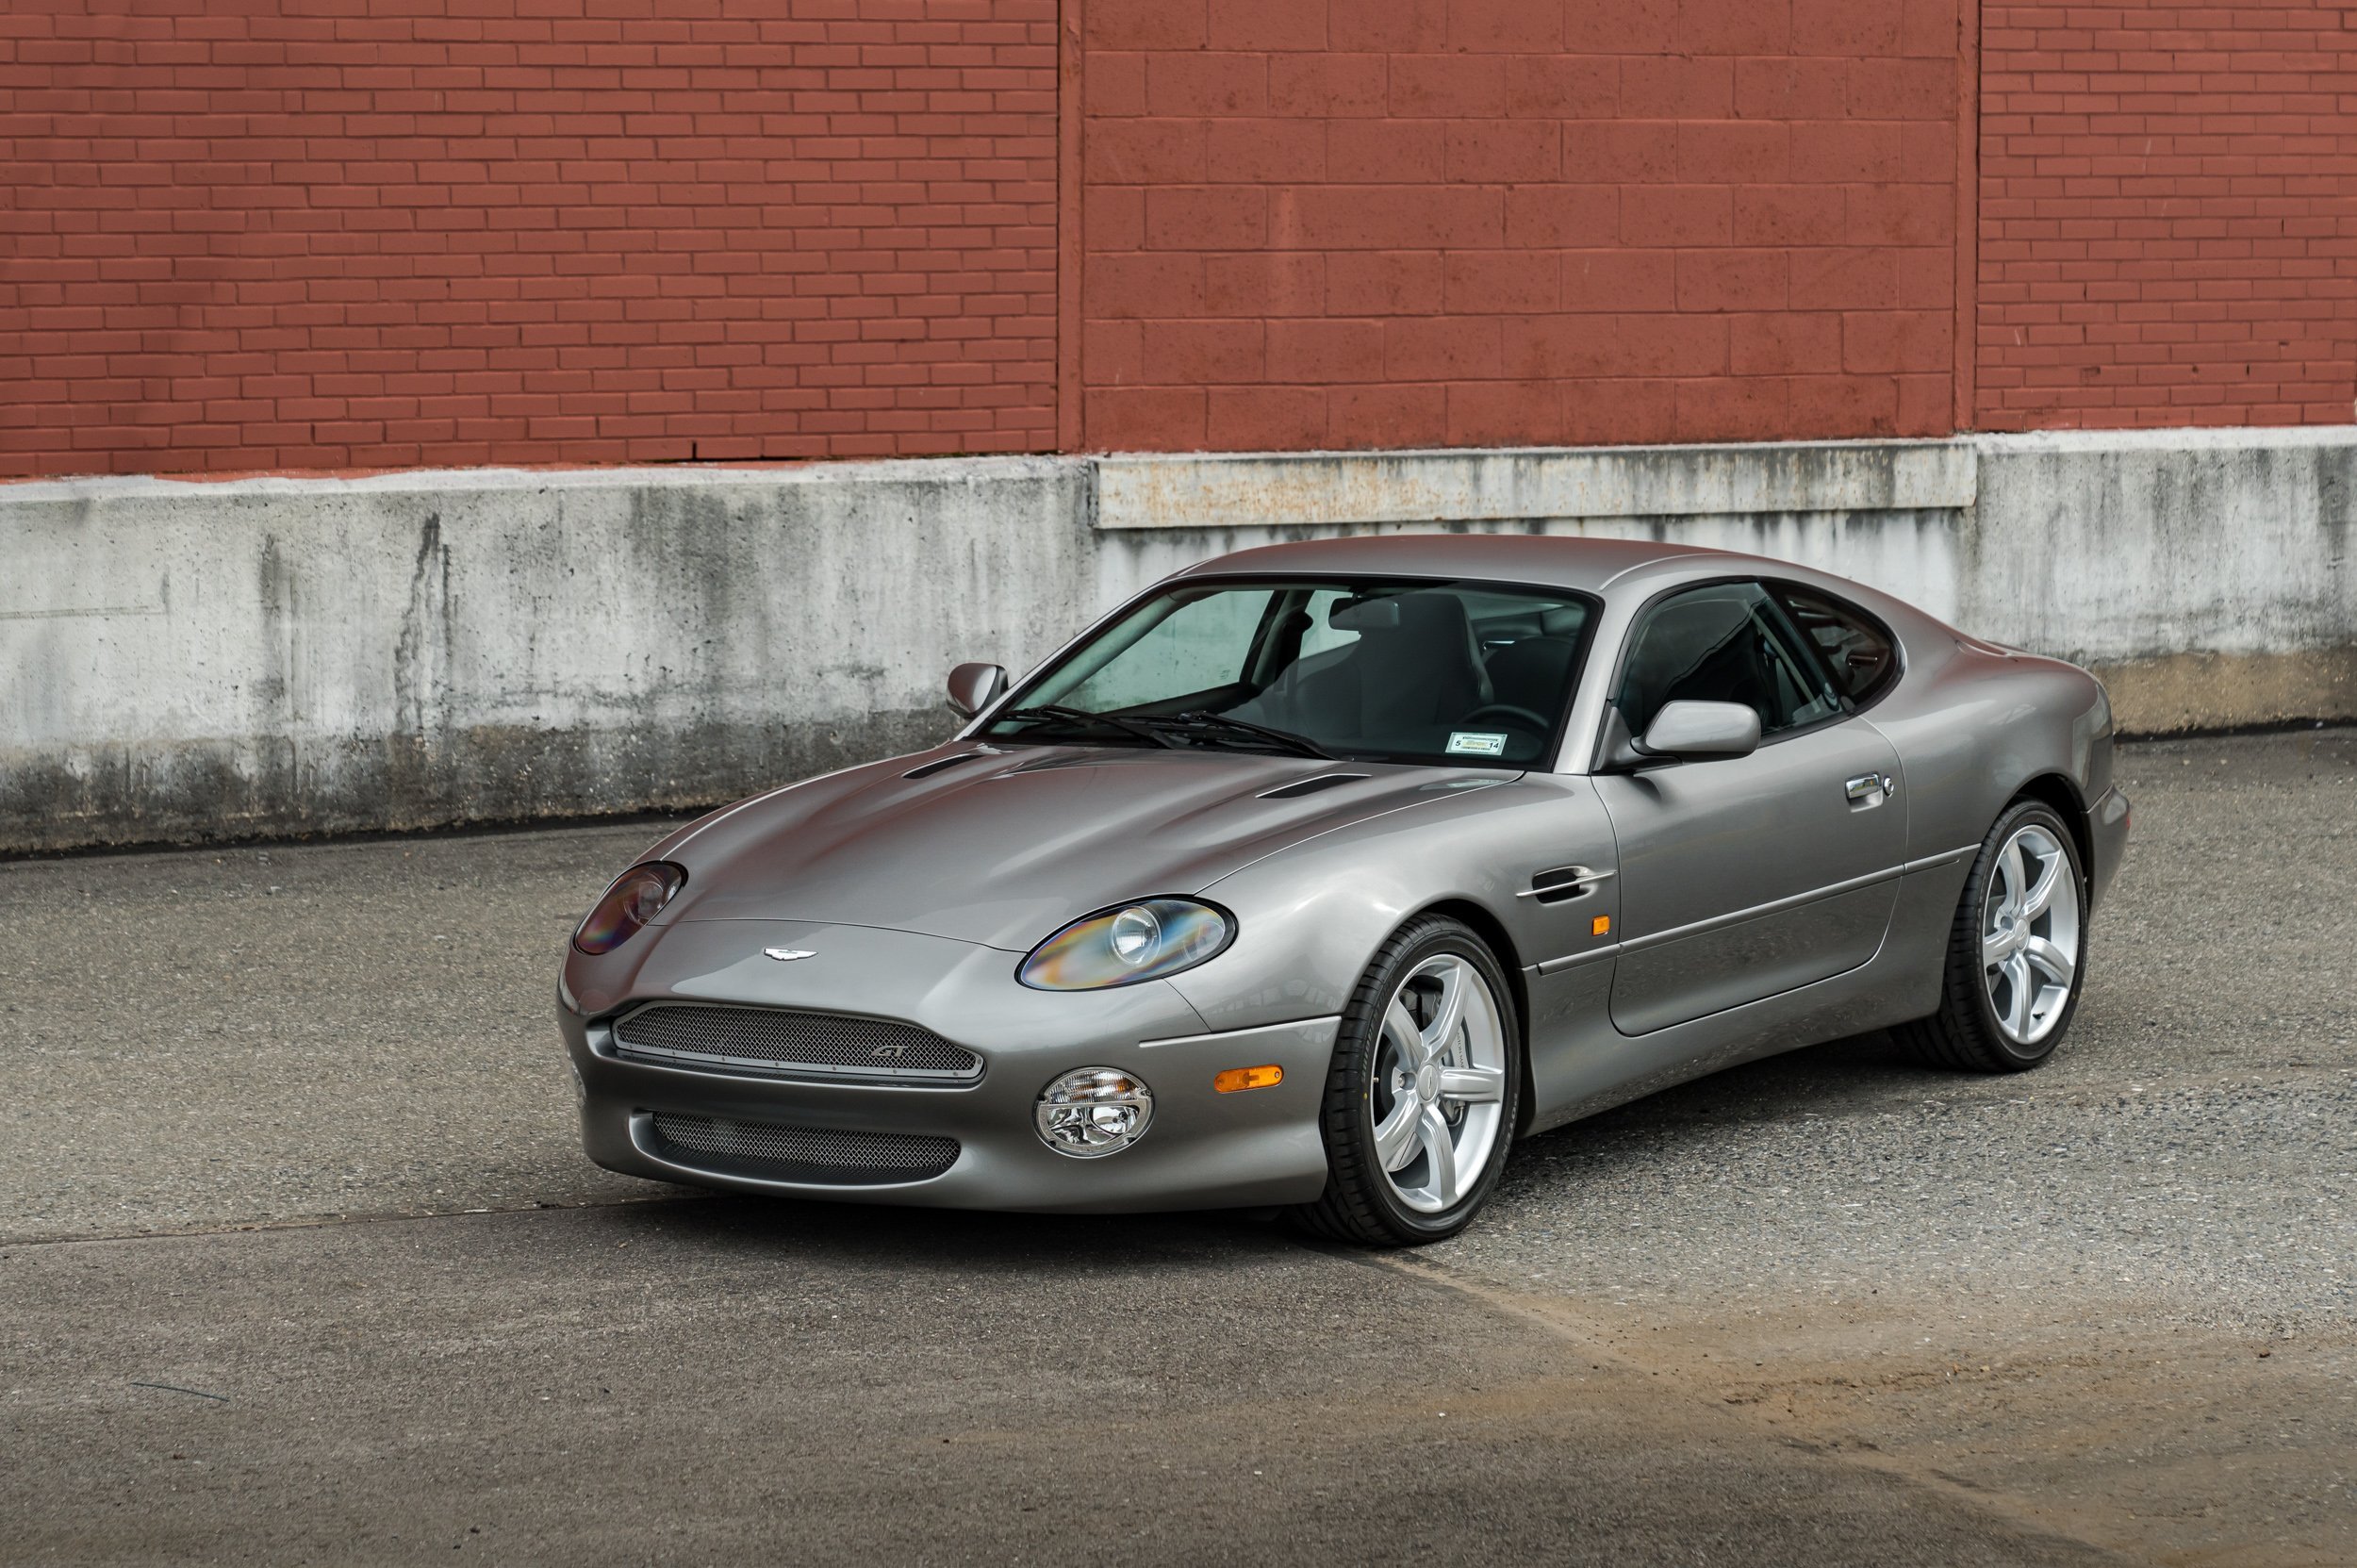 2003 Aston Martin DB7 GT - The official car of...? : r/regularcarreviews